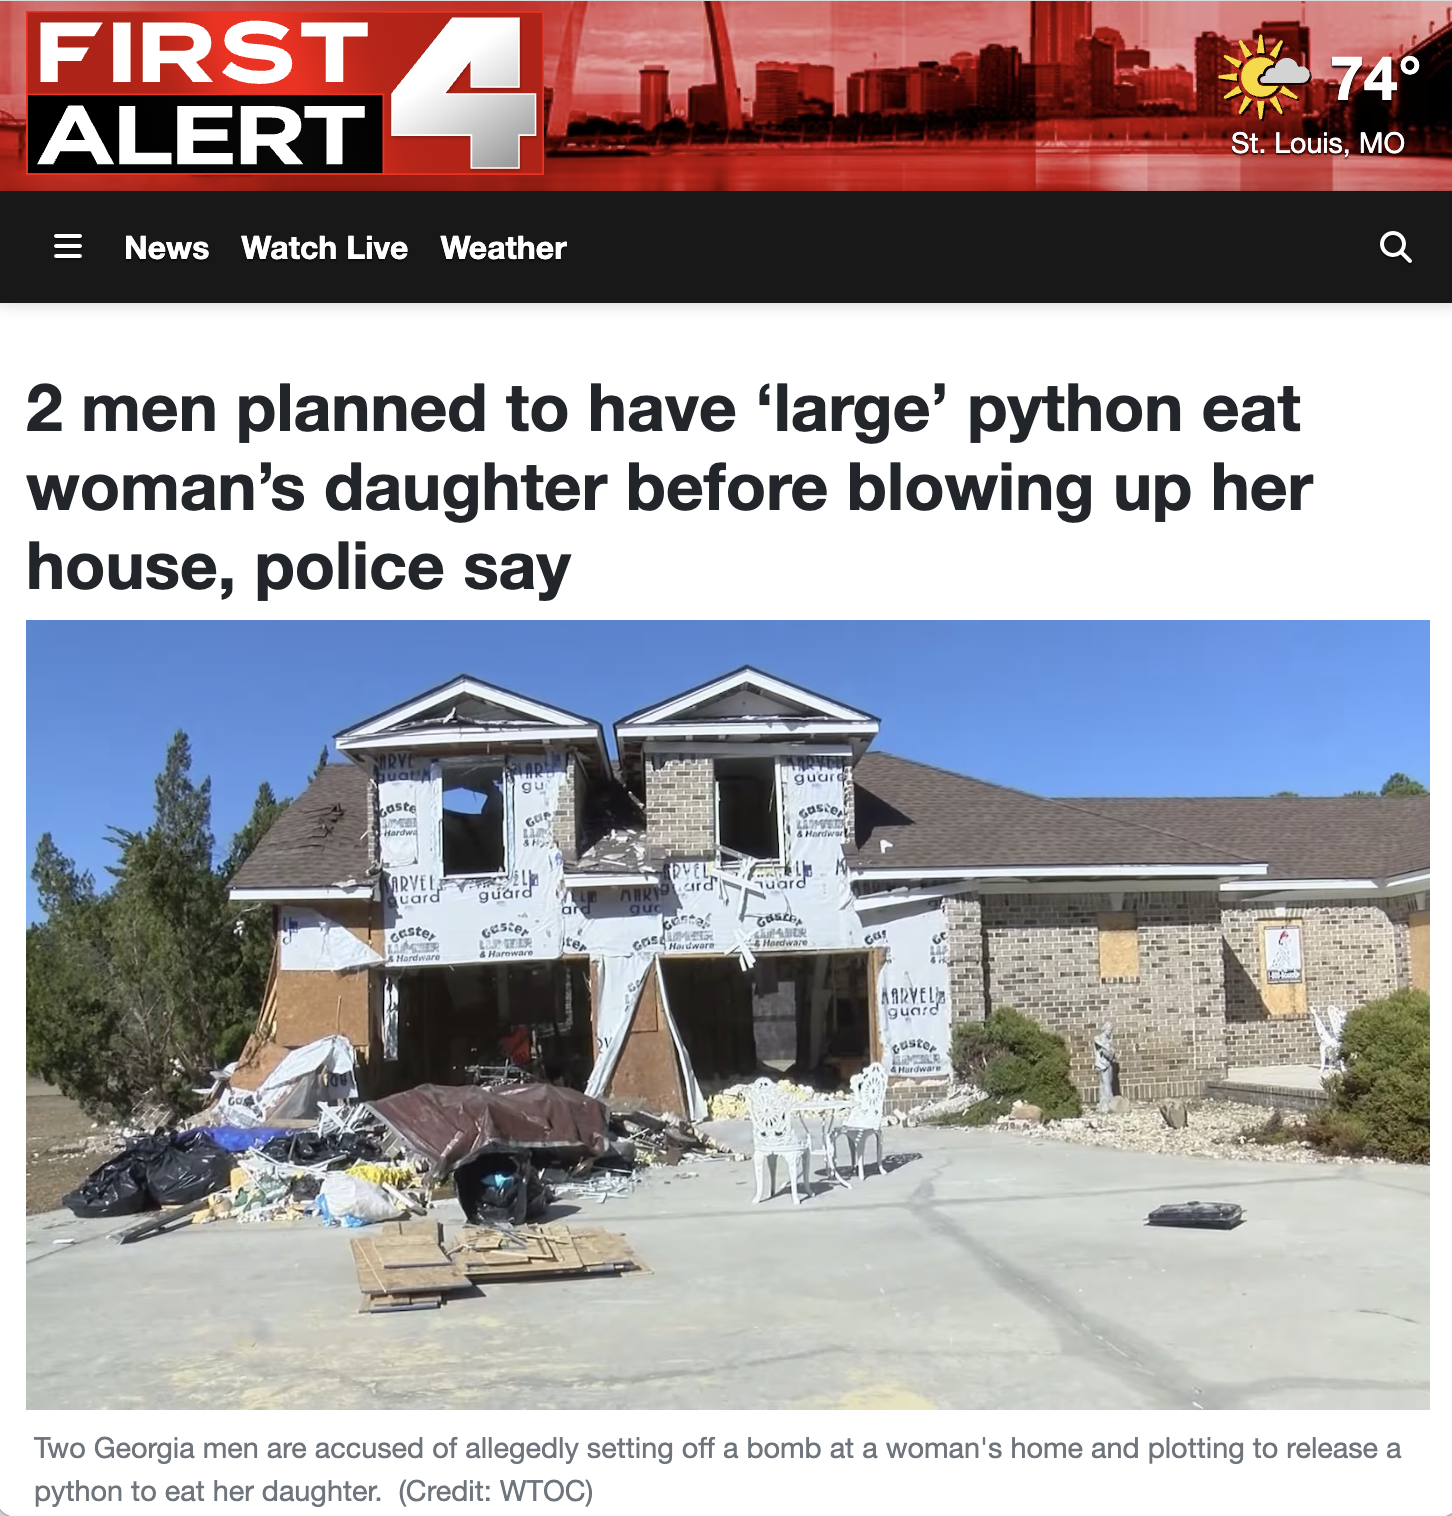 house - First Alert 4 News Watch Live Weather 74 St. Louis, Mo 2 men planned to have 'large' python eat woman's daughter before blowing up her house, police say Two Georgia men are accused of allegedly setting off a bomb at a woman's home and plotting to 